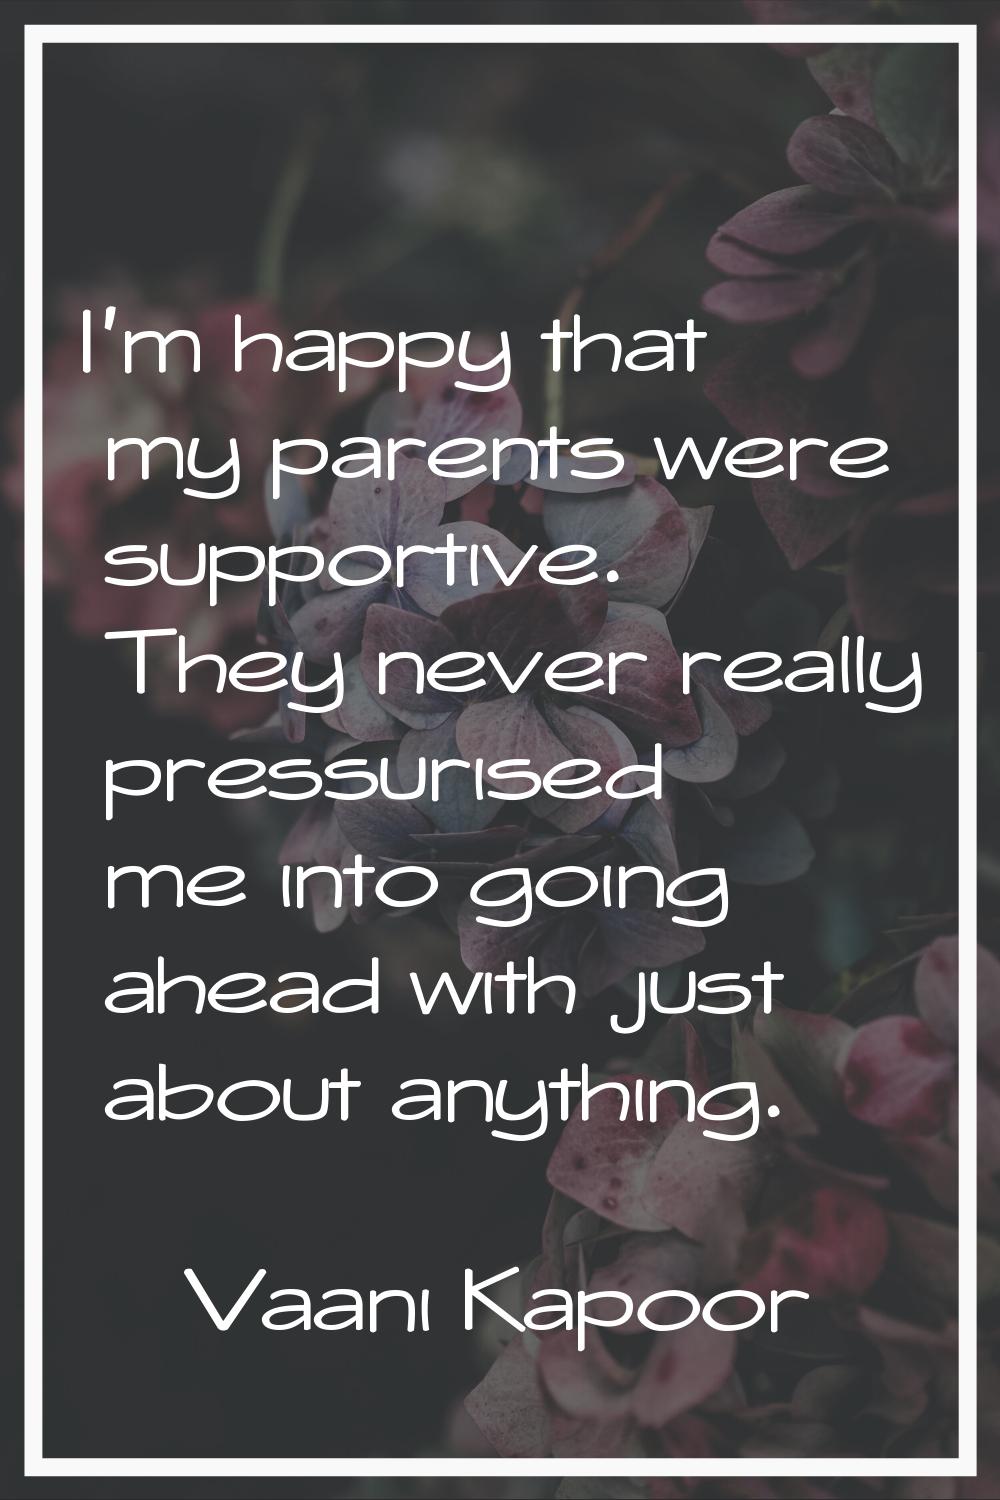 I'm happy that my parents were supportive. They never really pressurised me into going ahead with j